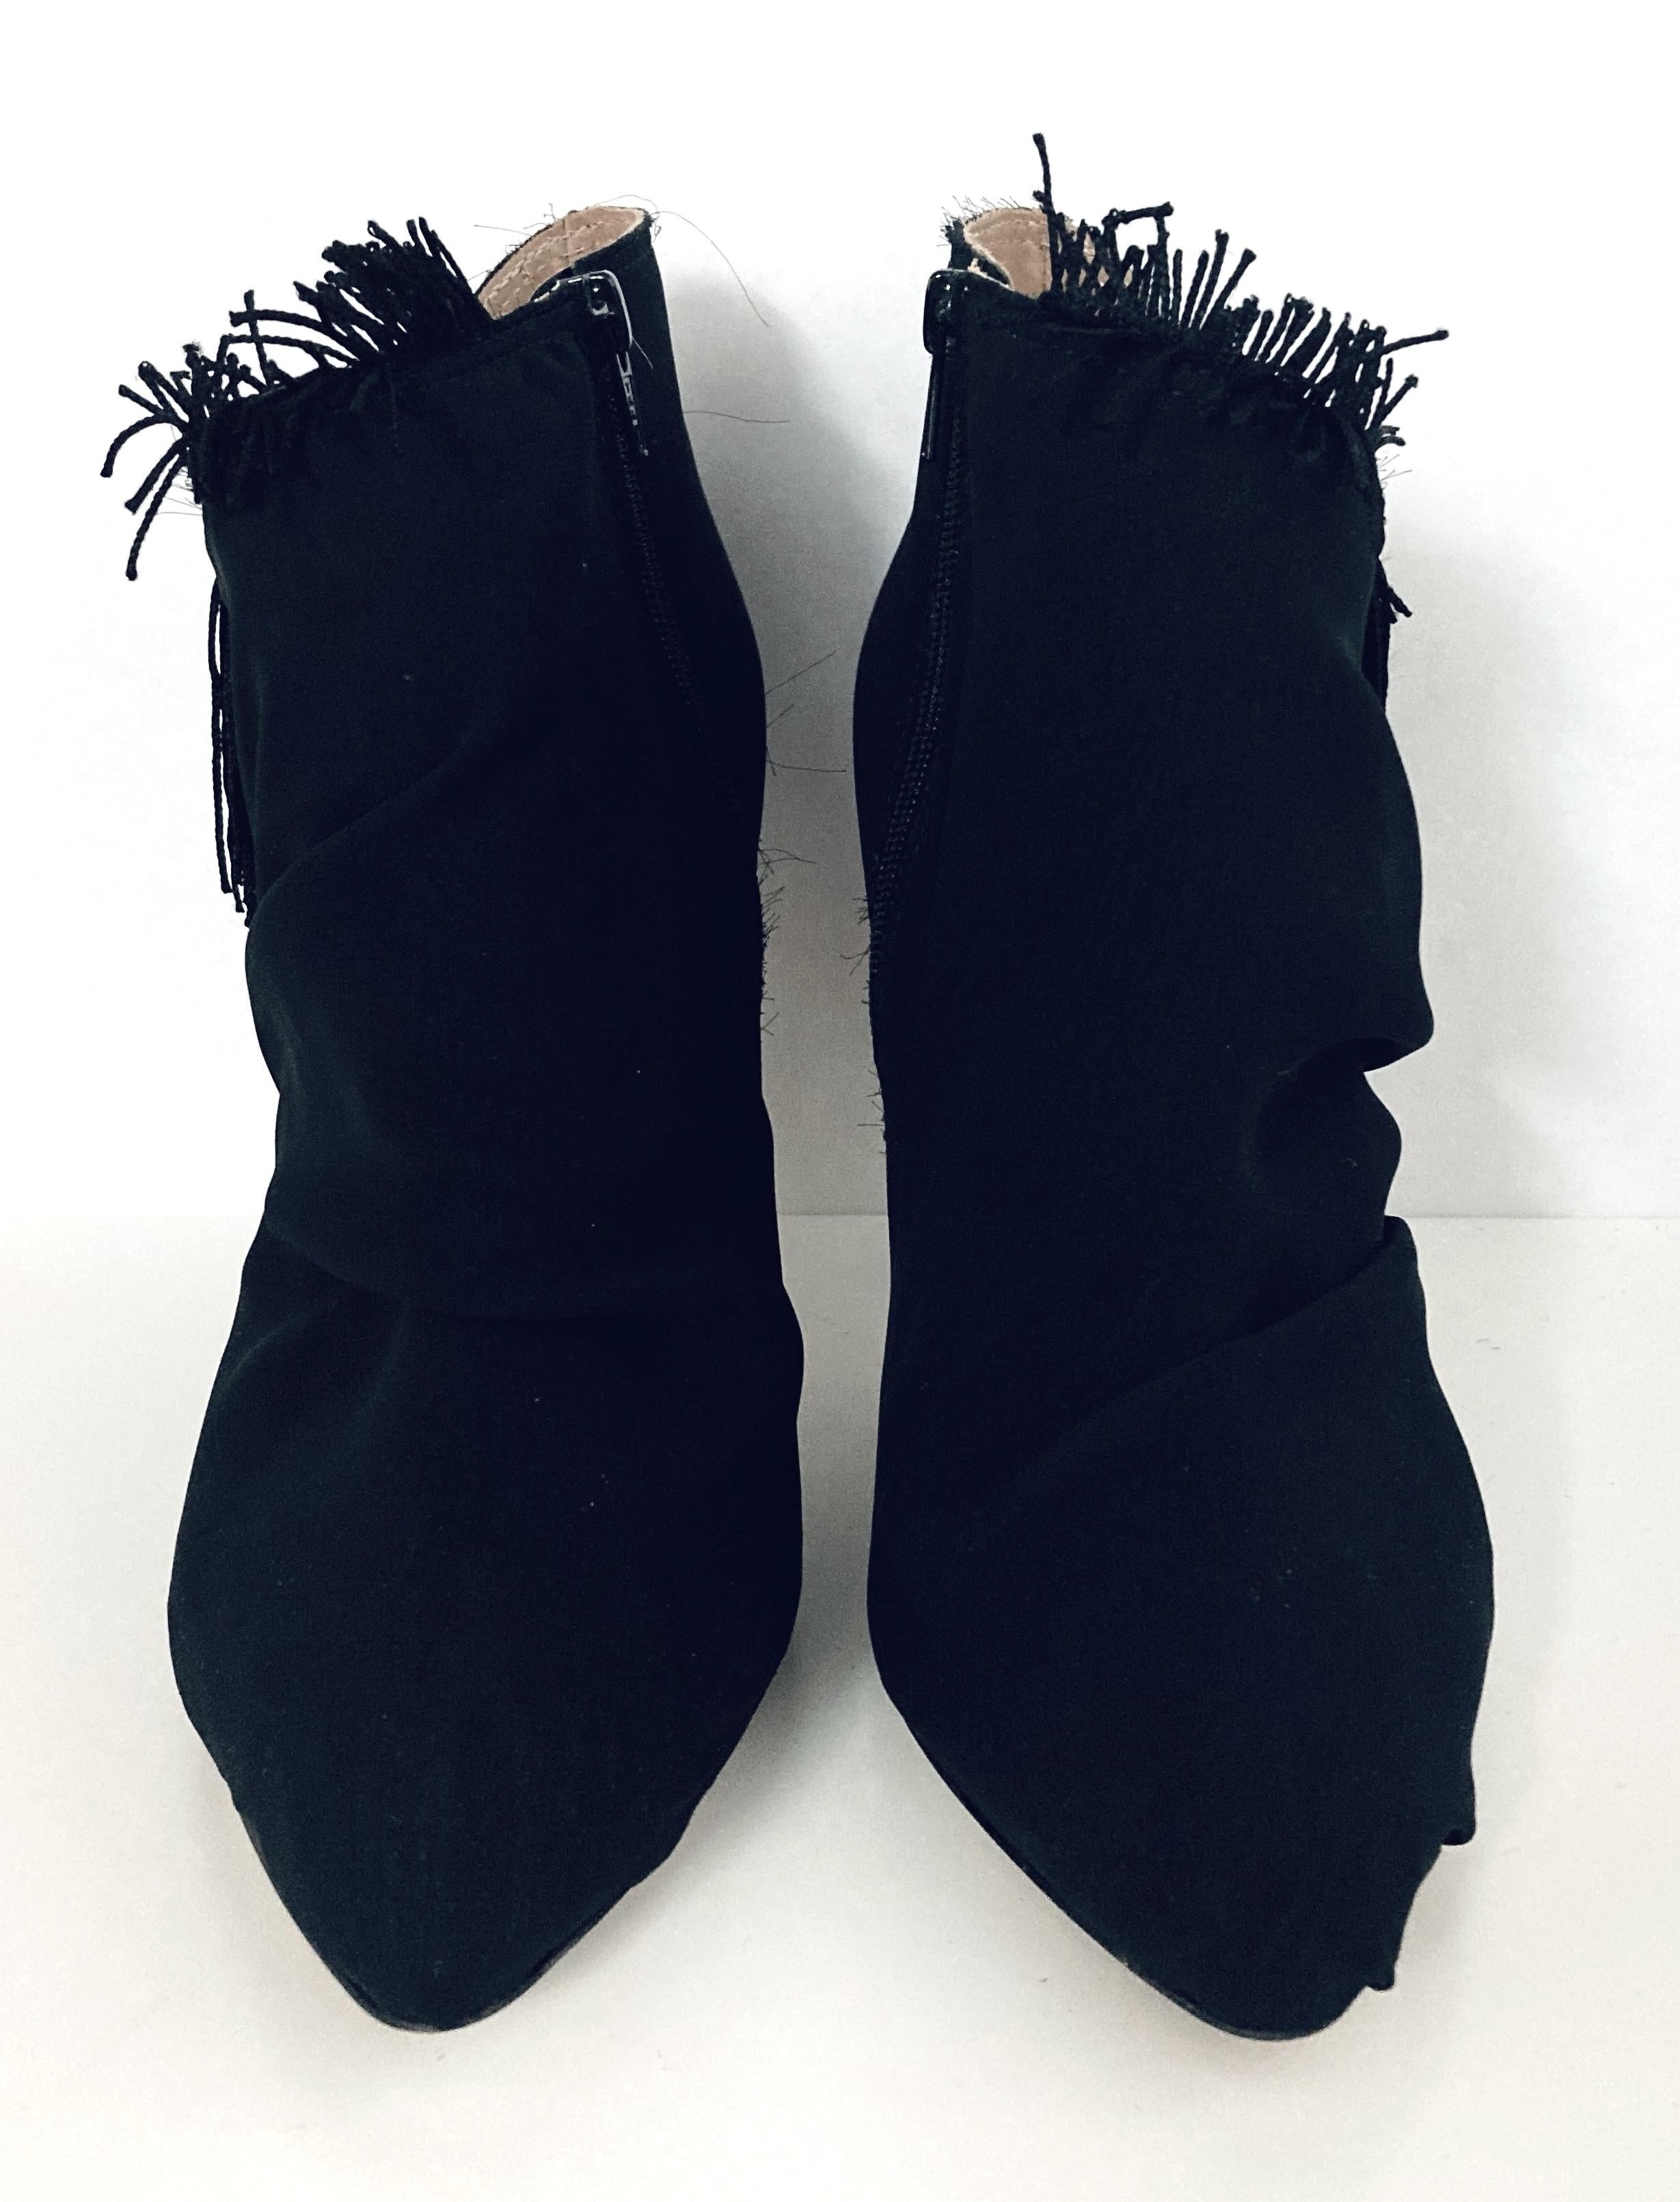 Cool and quirky Maison Margiela ankle boots - bought for £695 and unworn. They have a softly draped, fabric swagged covering with structured inner and irregular fringed trim to top. Have a stiletto heel and zips to fasten. Size 36.5. Measure approx